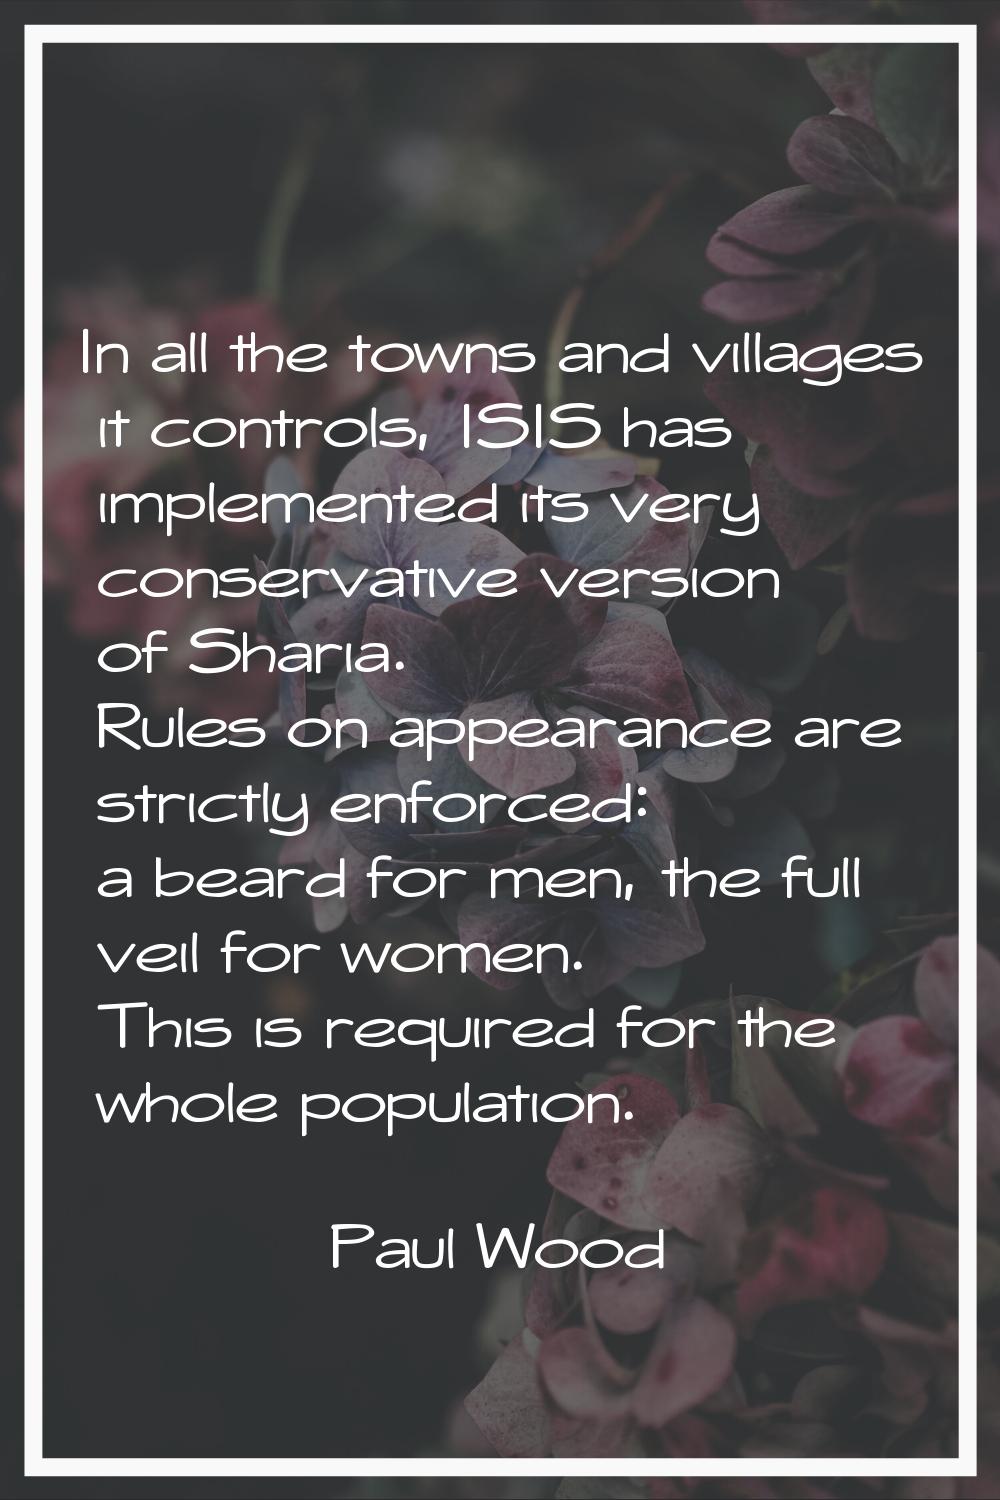 In all the towns and villages it controls, ISIS has implemented its very conservative version of Sh